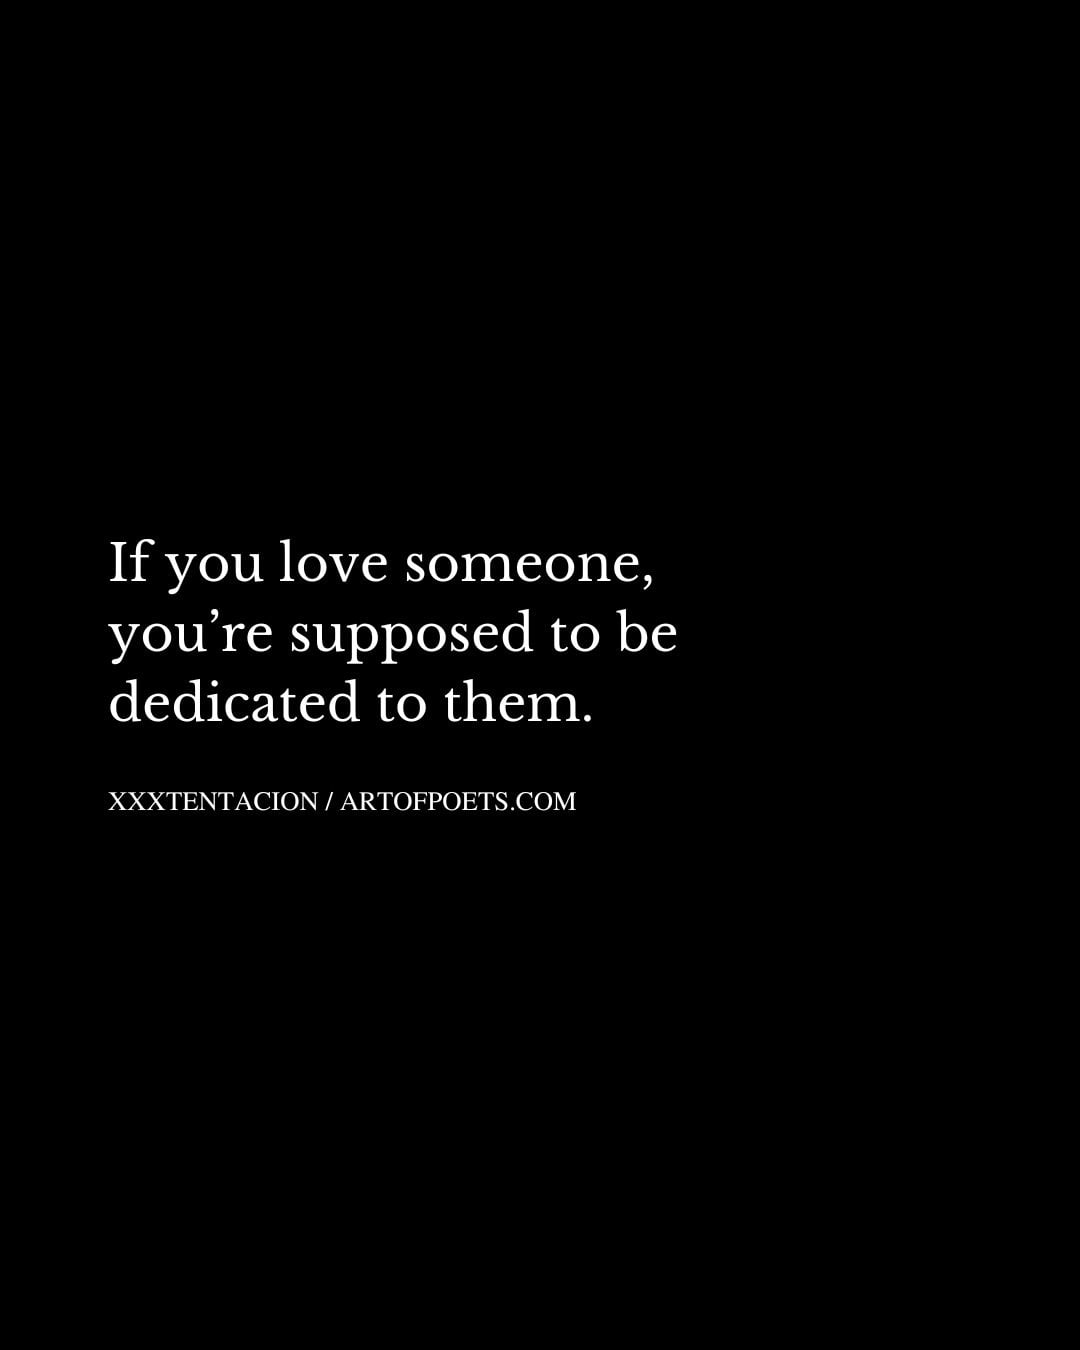 If you love someone youre supposed to be dedicated to them